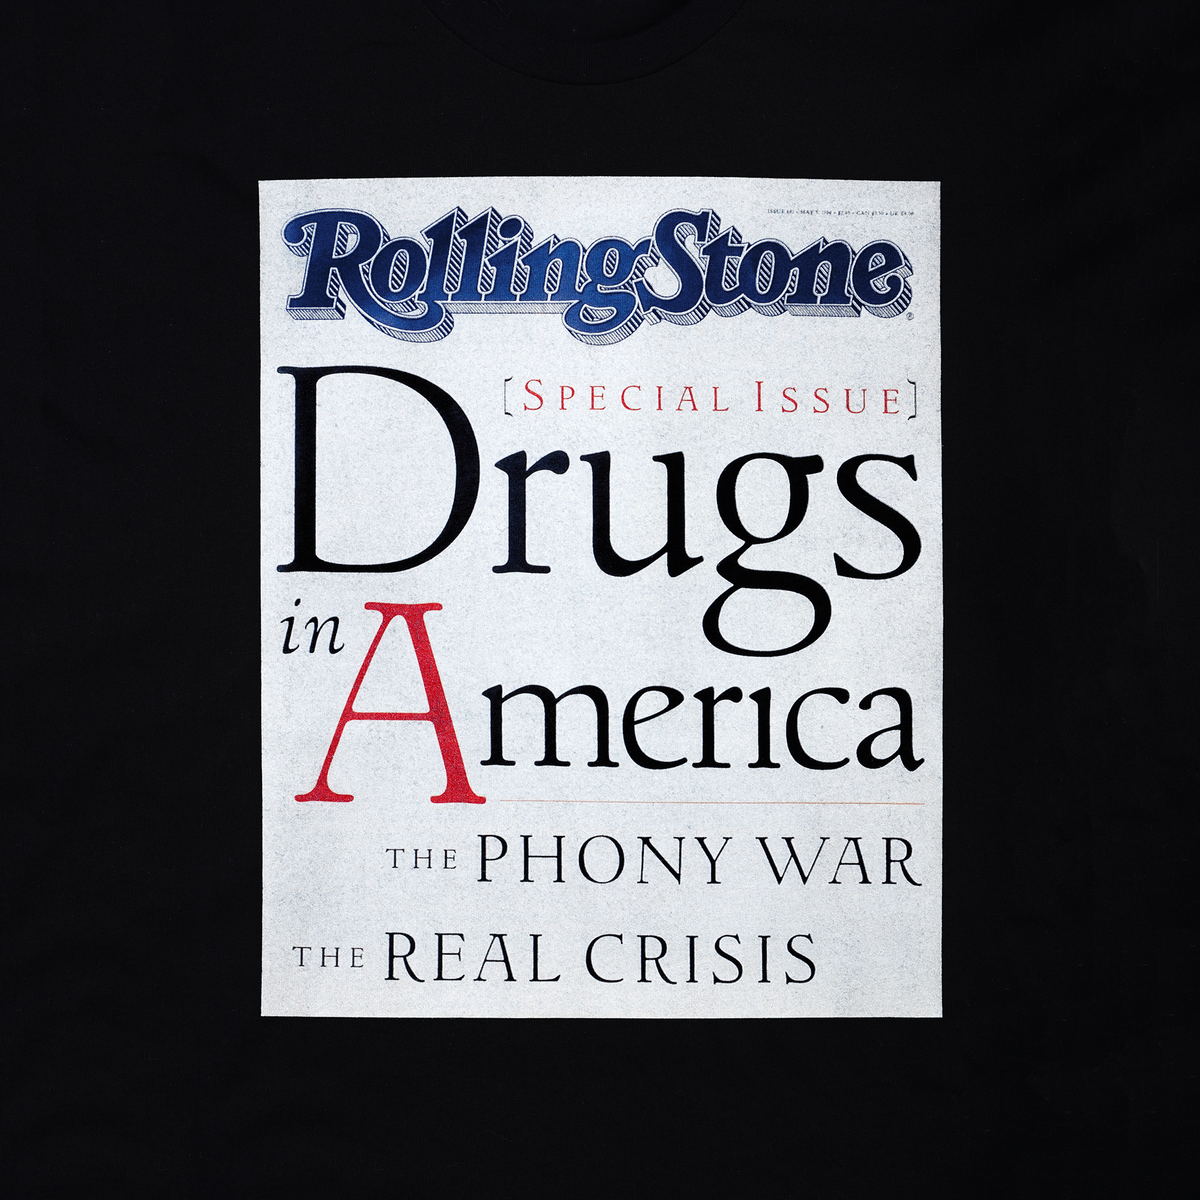 Drugs in America Cover Tee